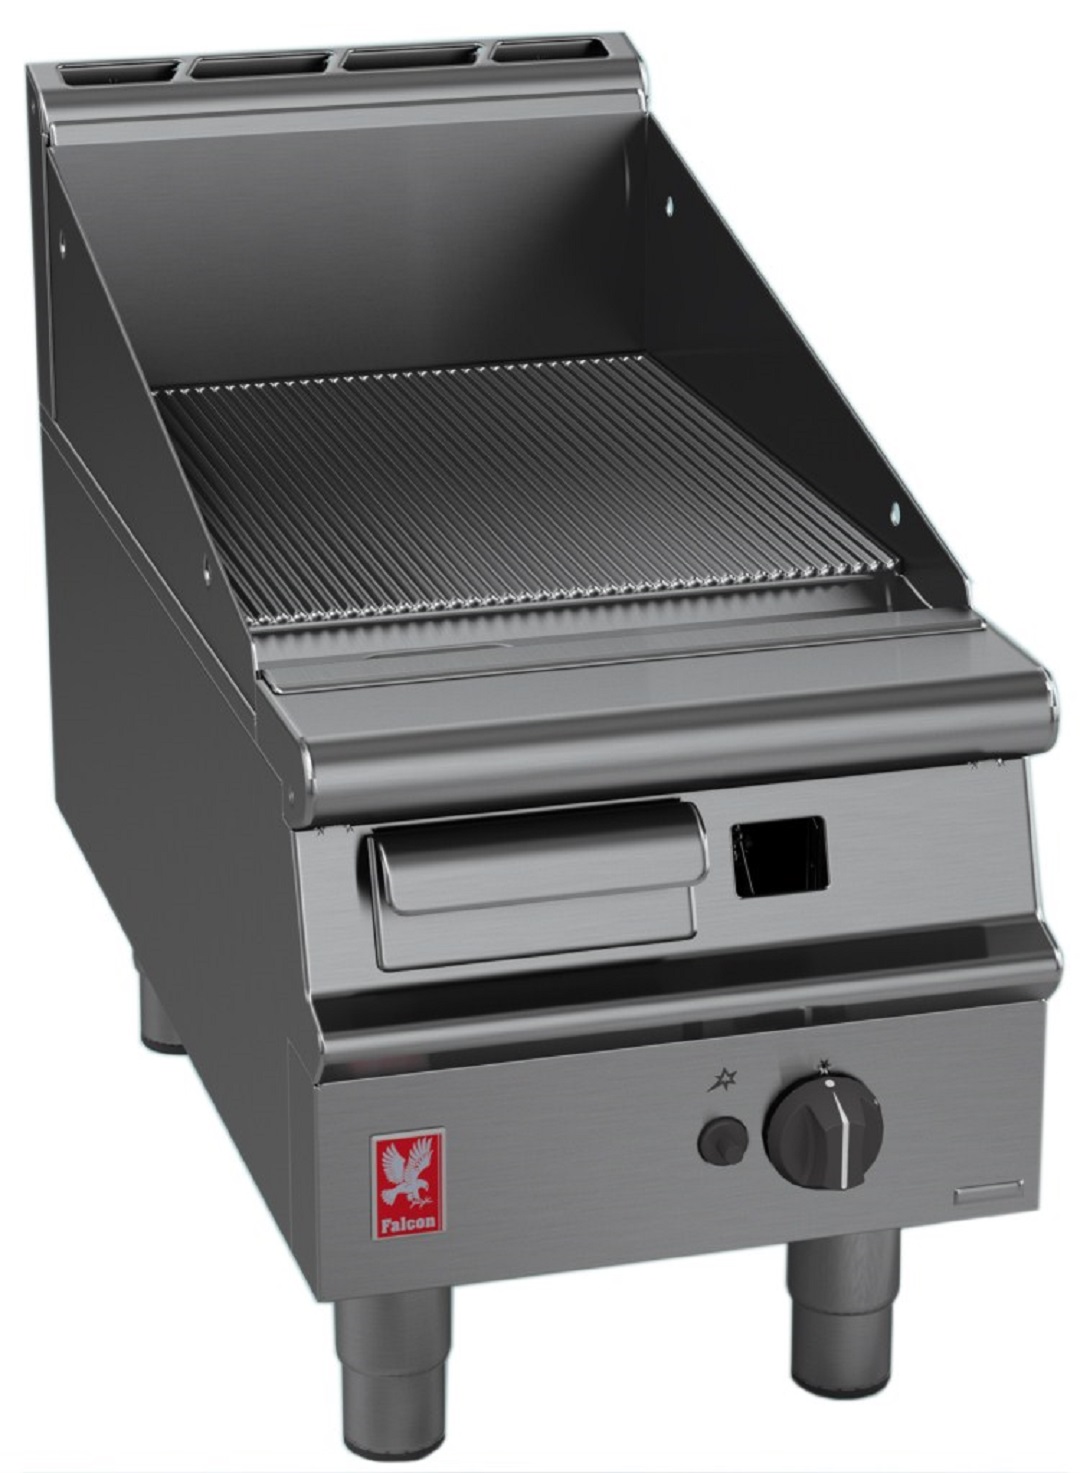 Falcon Dominator PLUS G3441R Ribbed Griddle